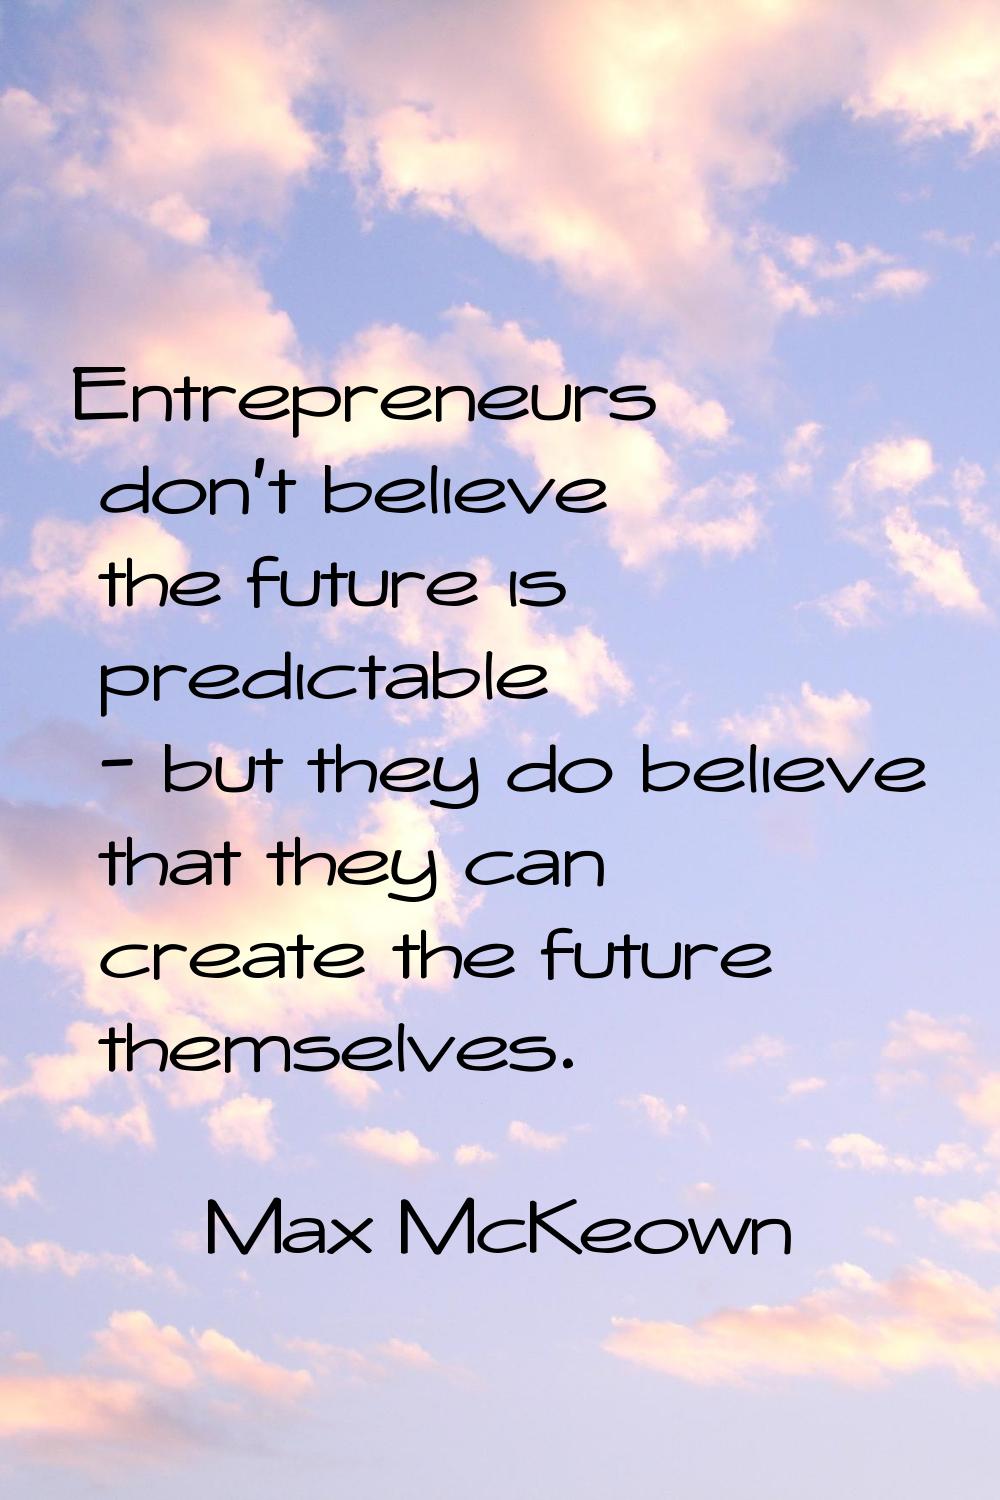 Entrepreneurs don't believe the future is predictable - but they do believe that they can create th